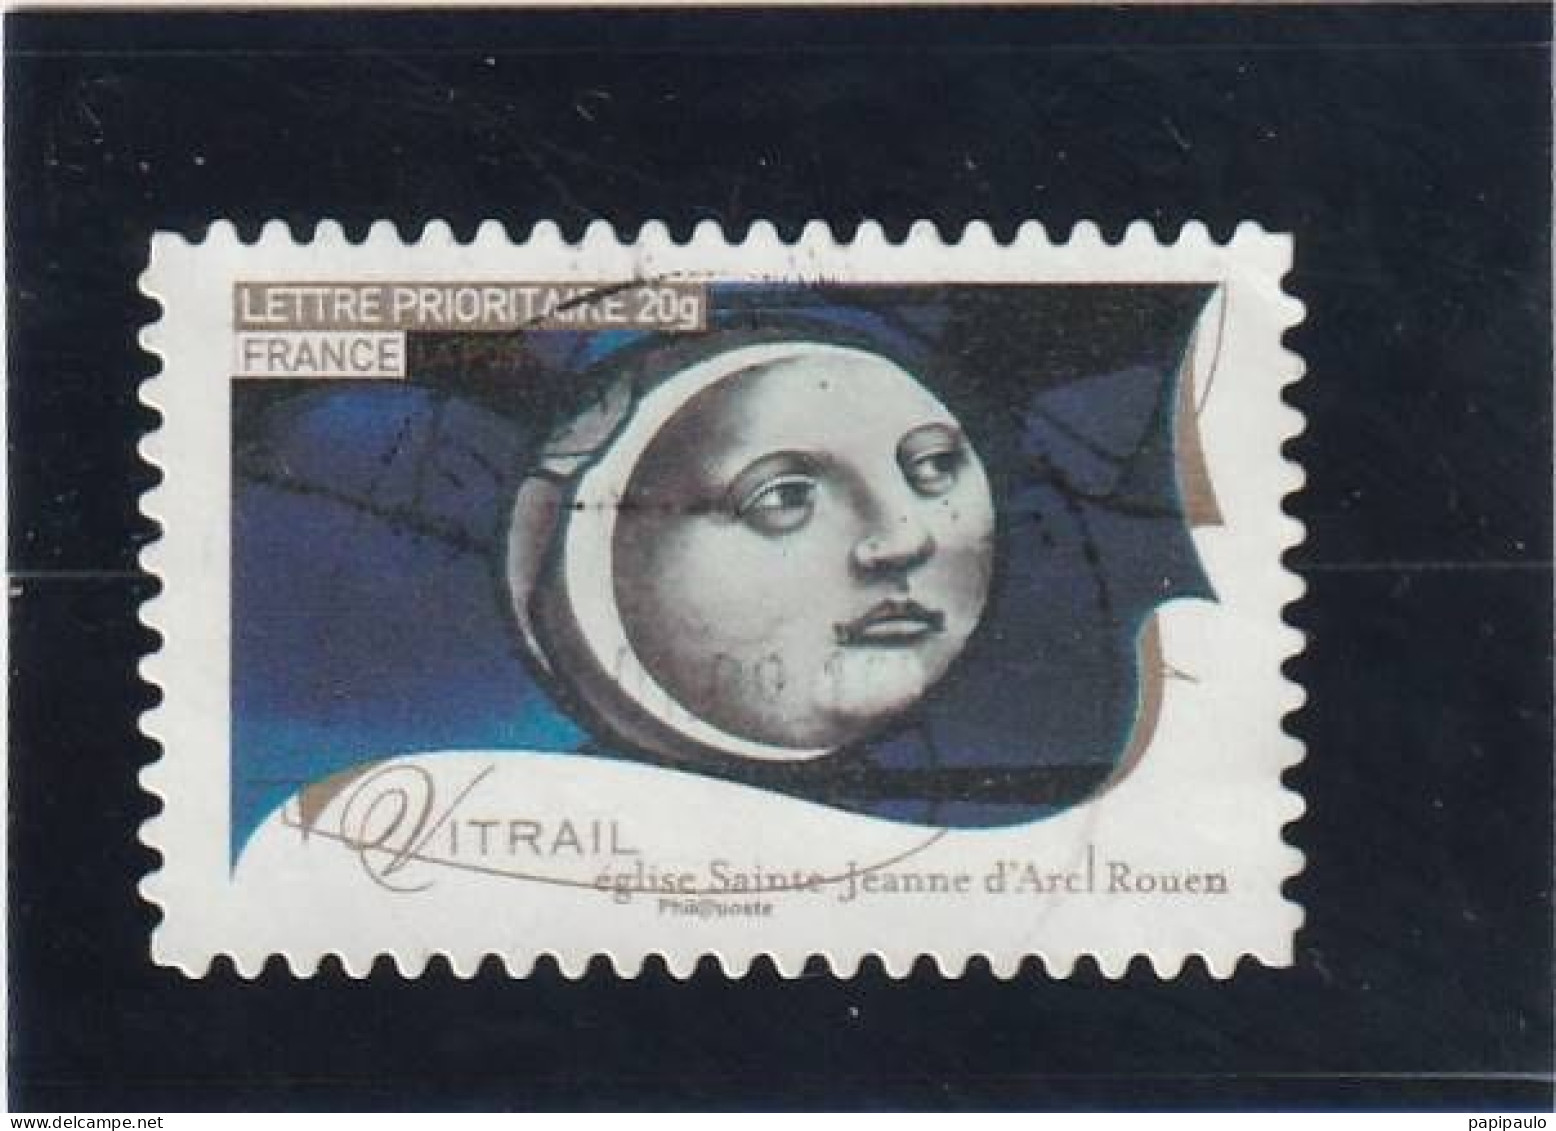 FRANCE 2009  Y&T 255  Lettre Prioritaire 20g - Used Stamps